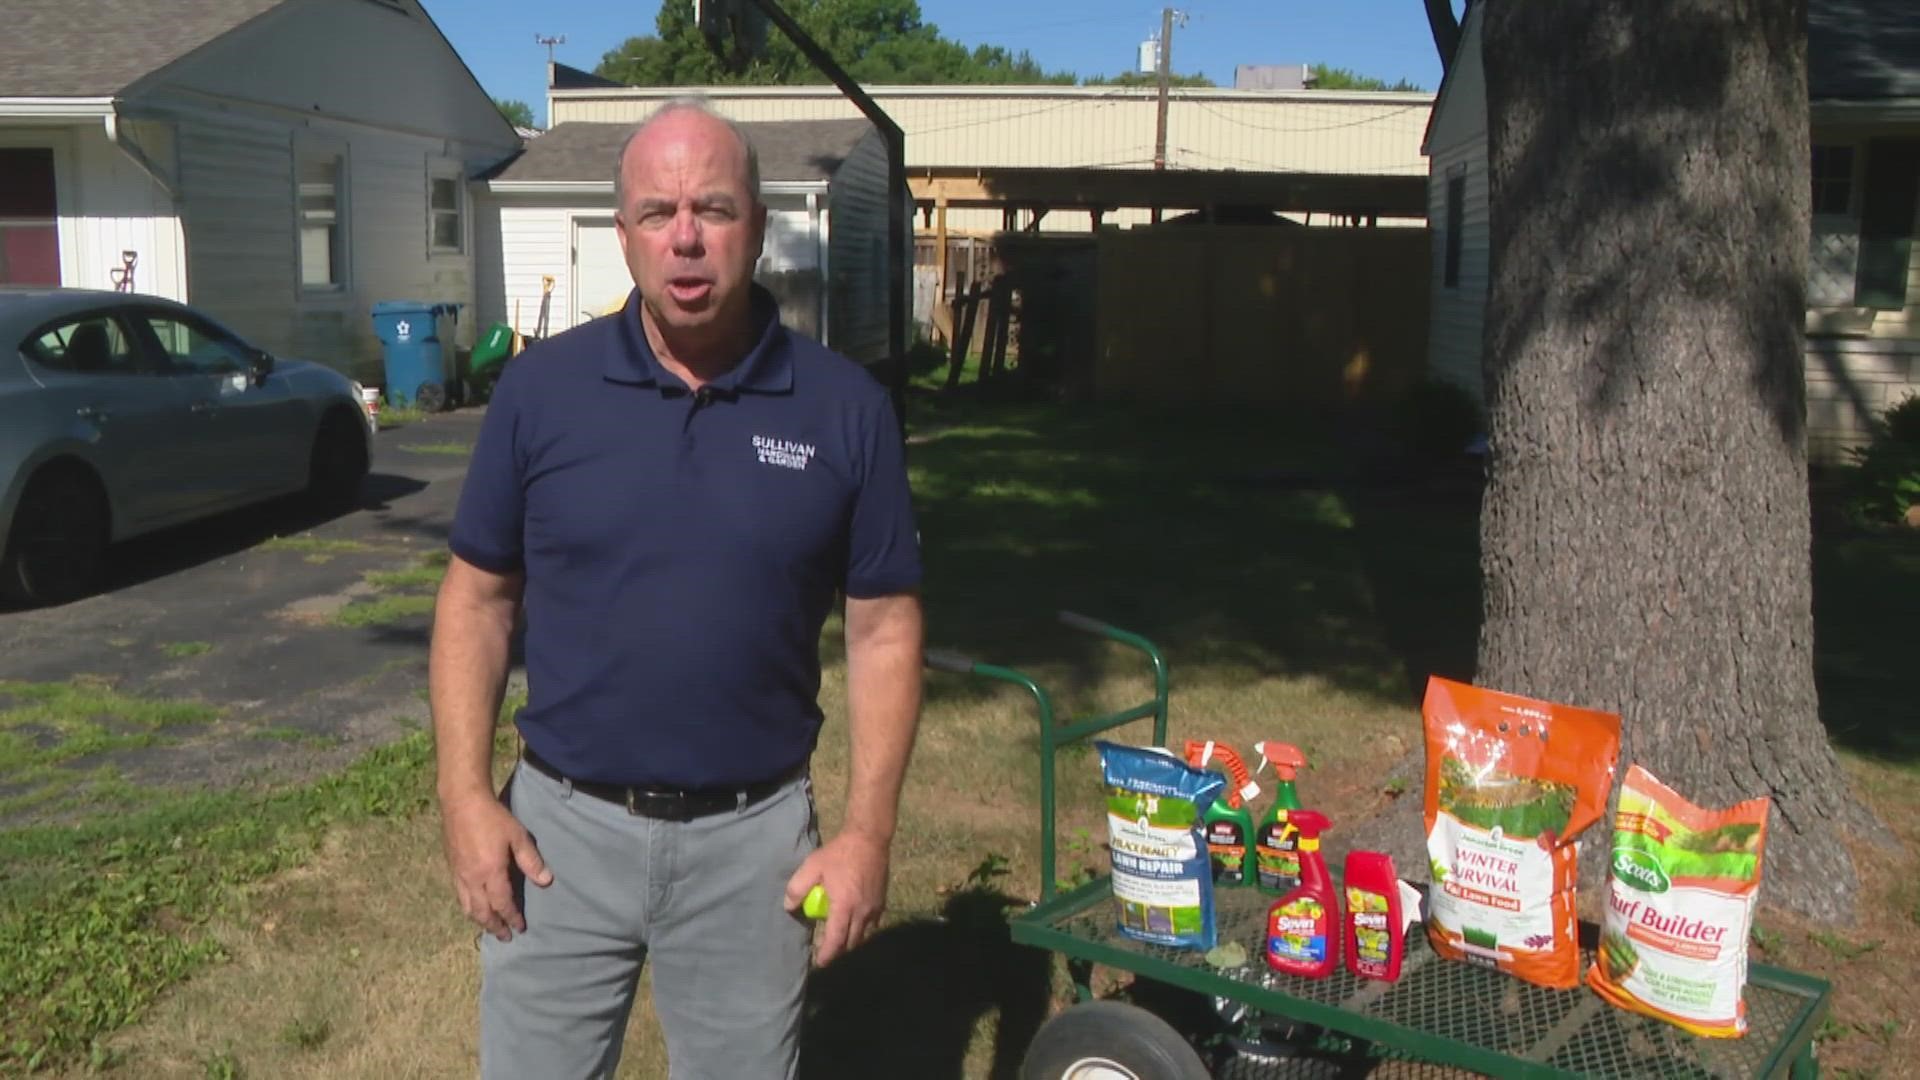 Pat Sullivan shows you how to maintain your home during the summer from taking care of your dry lawn, patio furniture and more!